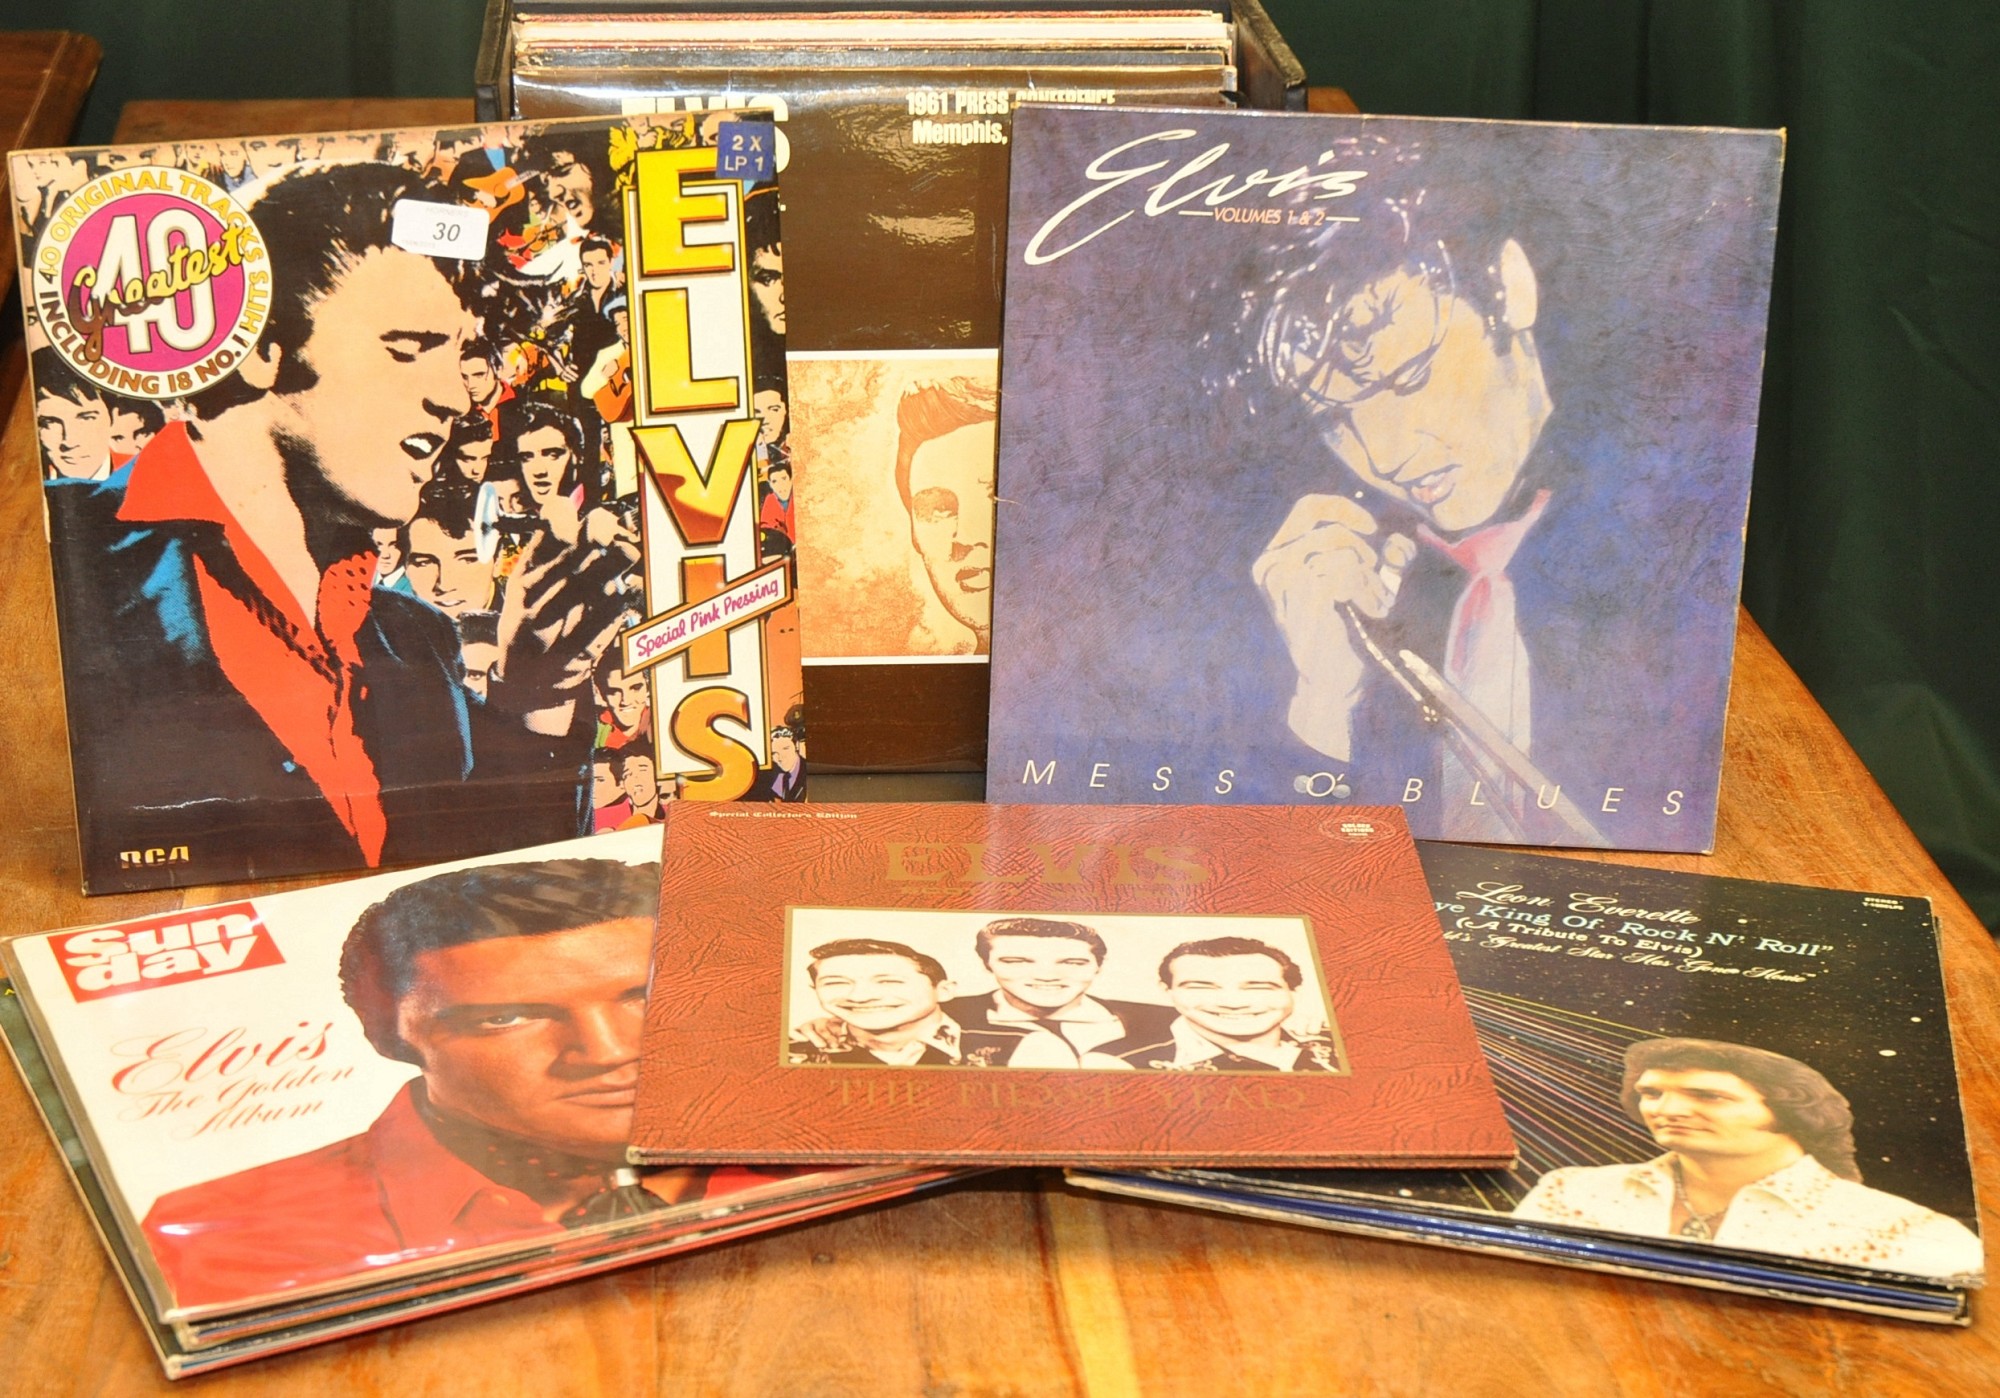 ONE CASE OF ELVIS LPS INCLUDING INTERVIEW DISCS, TRIBUTE ALBUMS AND COLOURED VINYL